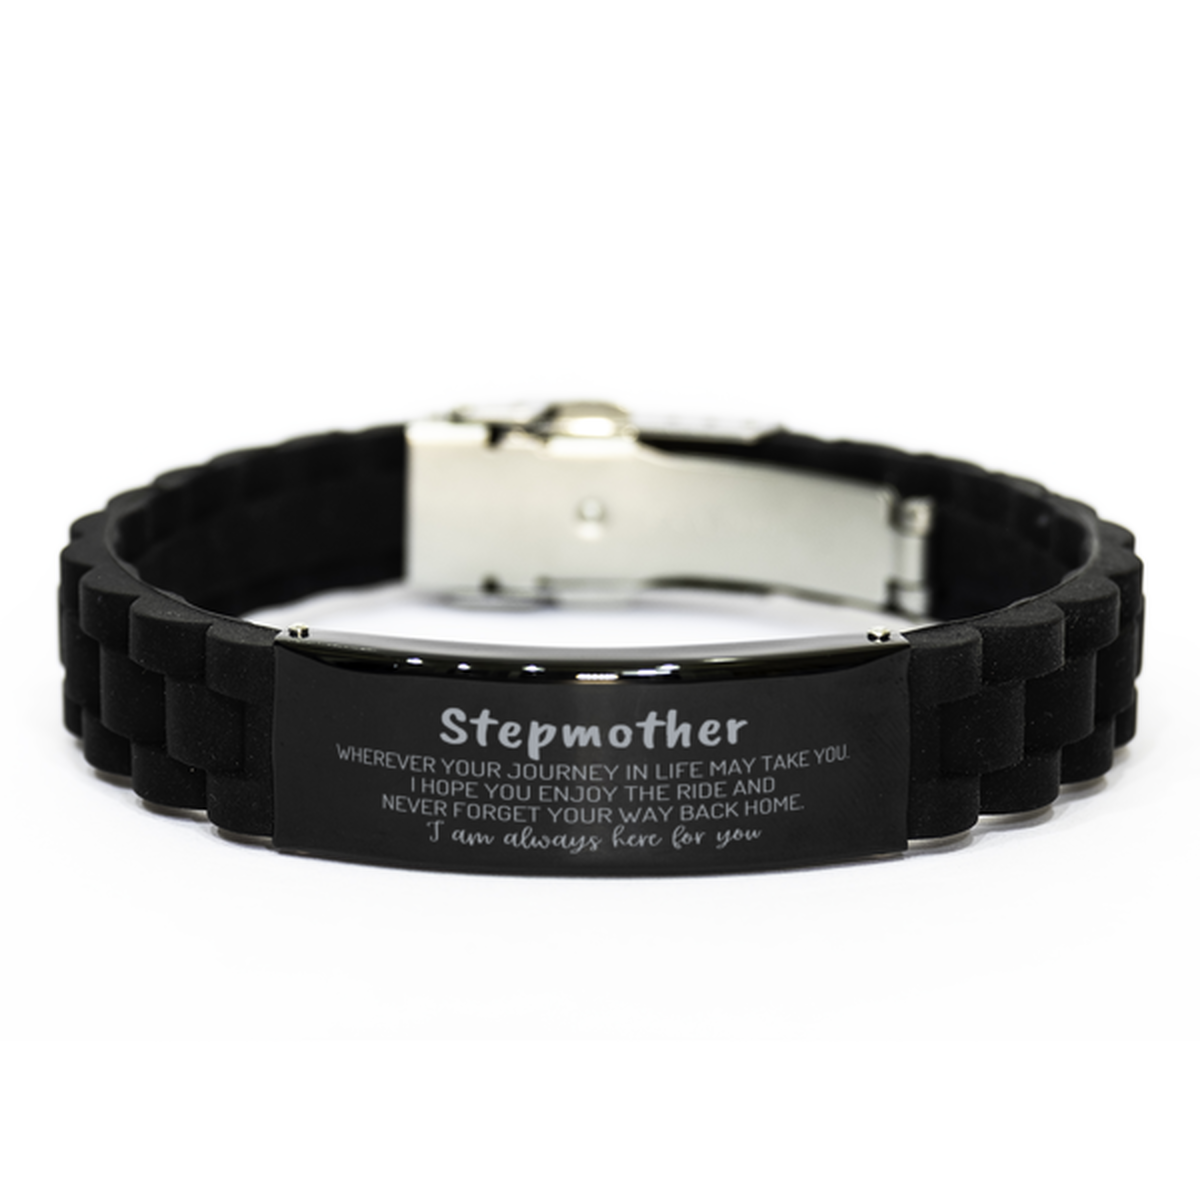 Stepmother wherever your journey in life may take you, I am always here for you Stepmother Black Glidelock Clasp Bracelet, Awesome Christmas Gifts For Stepmother, Stepmother Birthday Gifts for Men Women Family Loved One